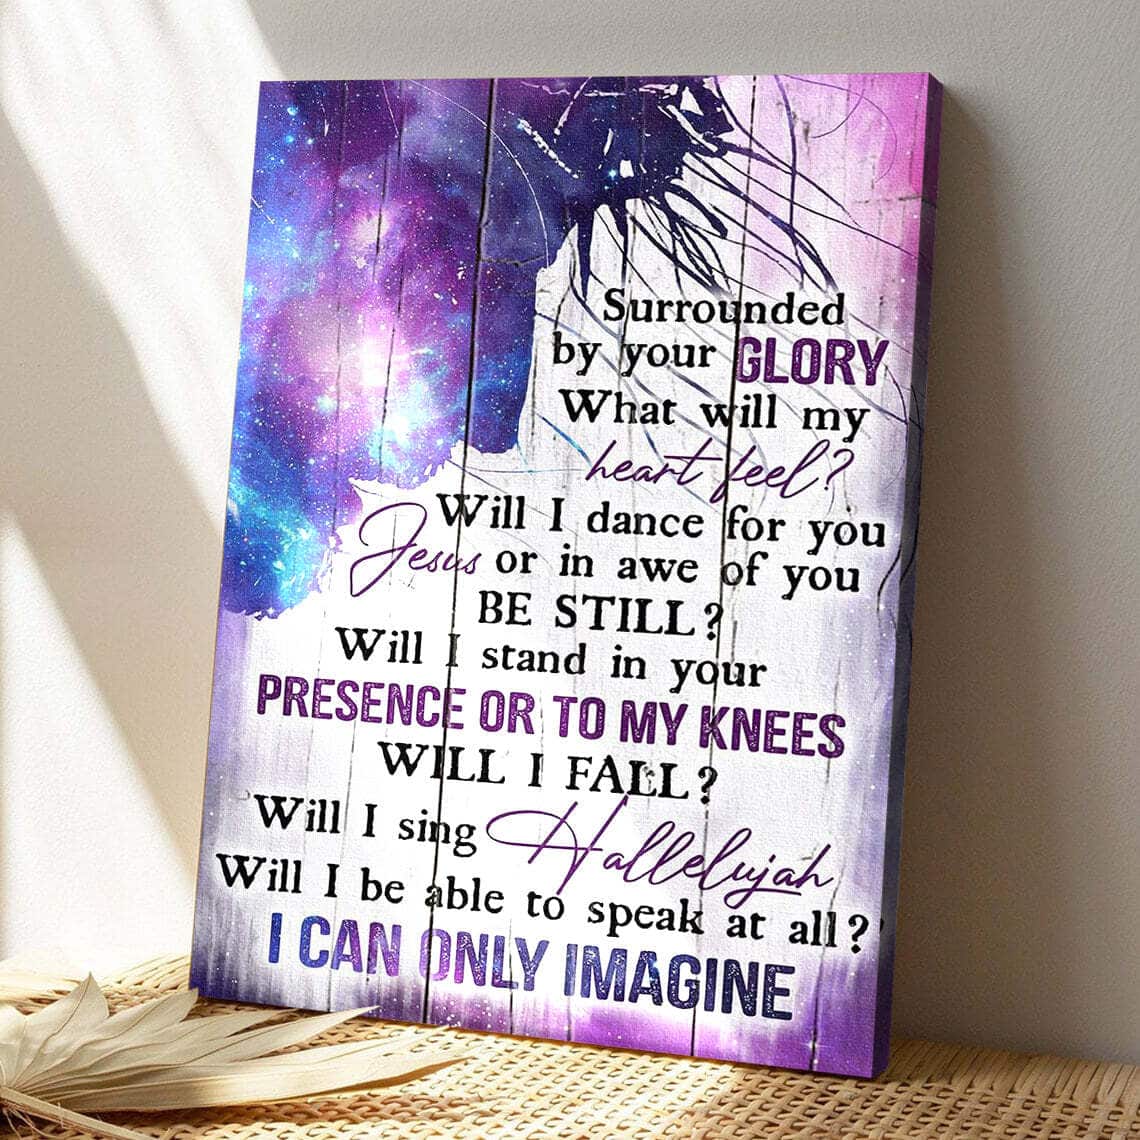 The Beautiful Galaxy I Can Only Imagine Wall Art Bible Verse Scripture Canvas Print